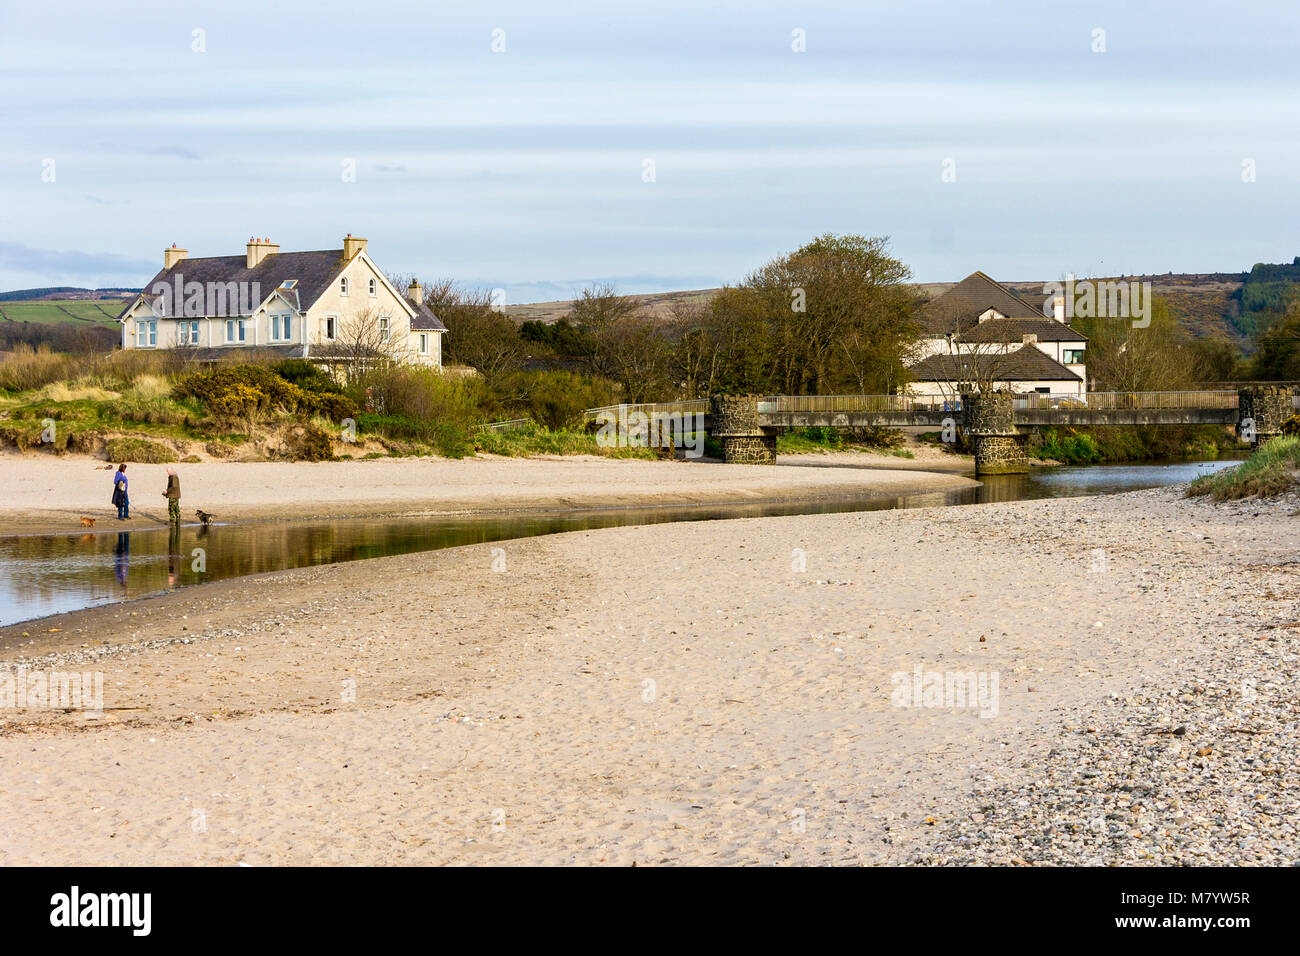 Views of the seaside beach at the small town of Ballycastle, County Antrim, Northern Ireland, United Kingdom Stock Photo